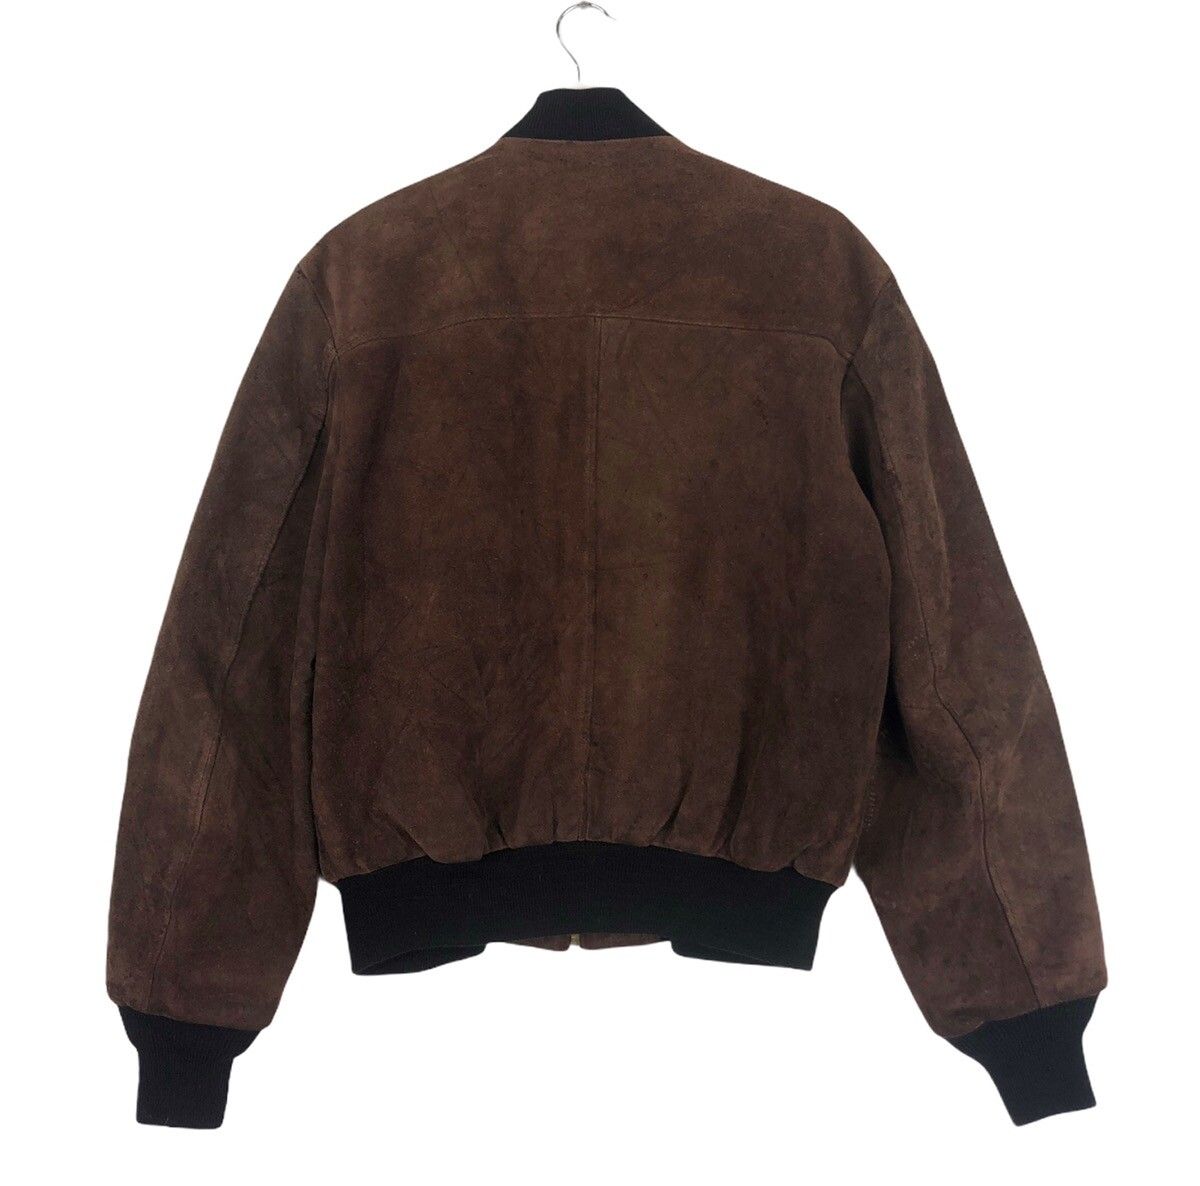 🔥SCHOTT NYC Pulp Fiction Suede Leather Jacket - 5